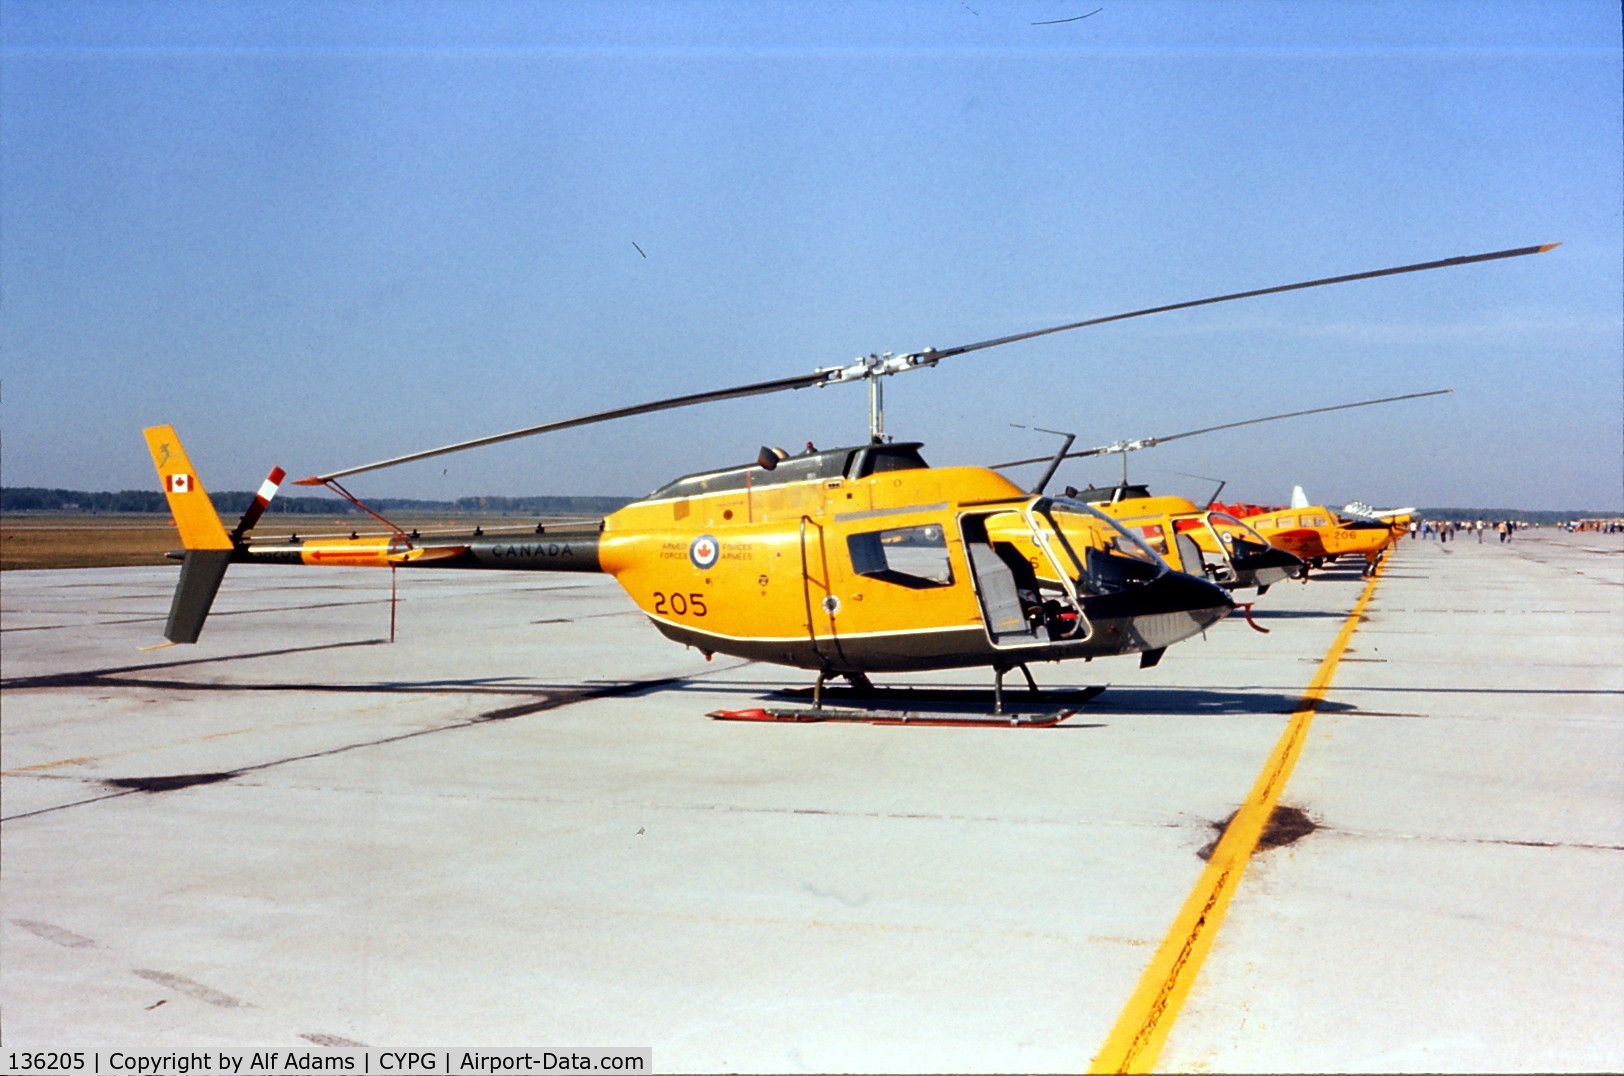 136205, 1971 Bell CH-136 Kiowa C/N 44005, Photo shows Kiowa 136205 in 1976 when it attended the airshow at Canadian Forces Base Portage la Prairie, Manitoba, Canada.